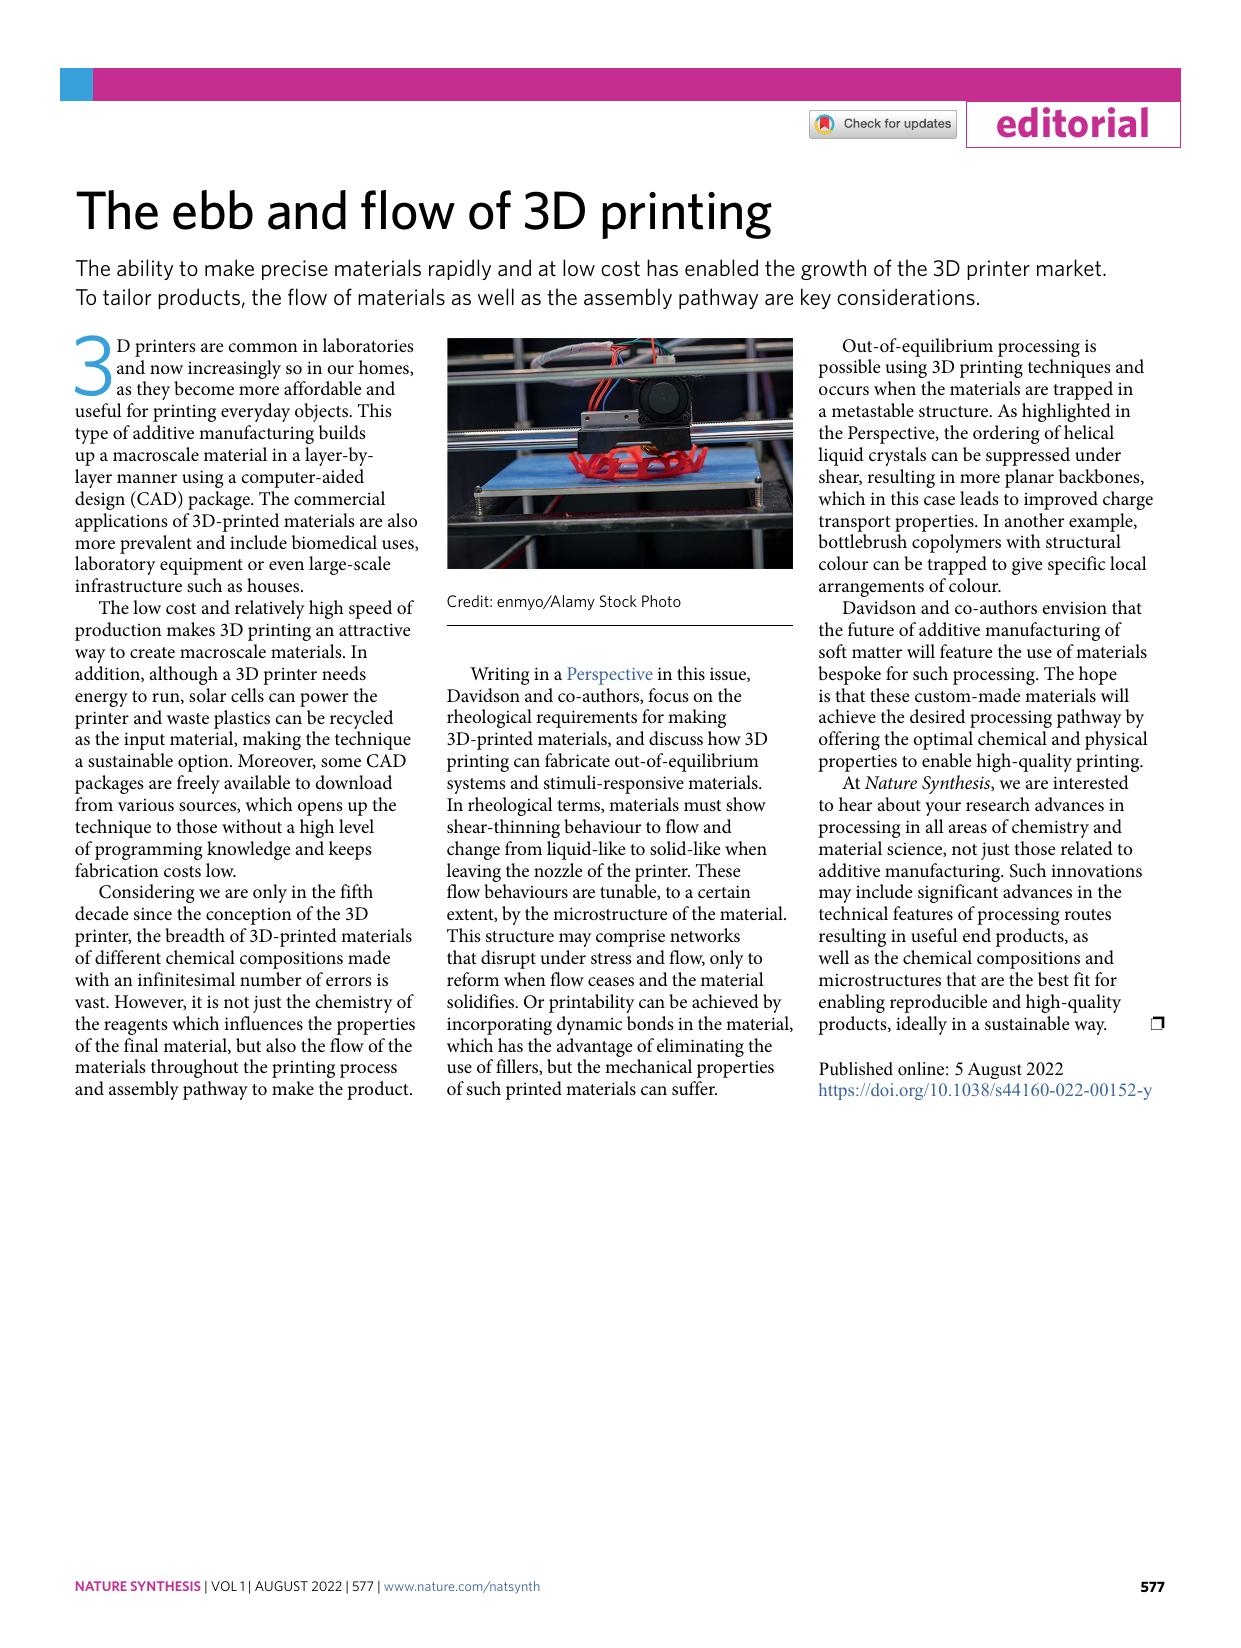 The ebb and flow of 3D printing by Unknown